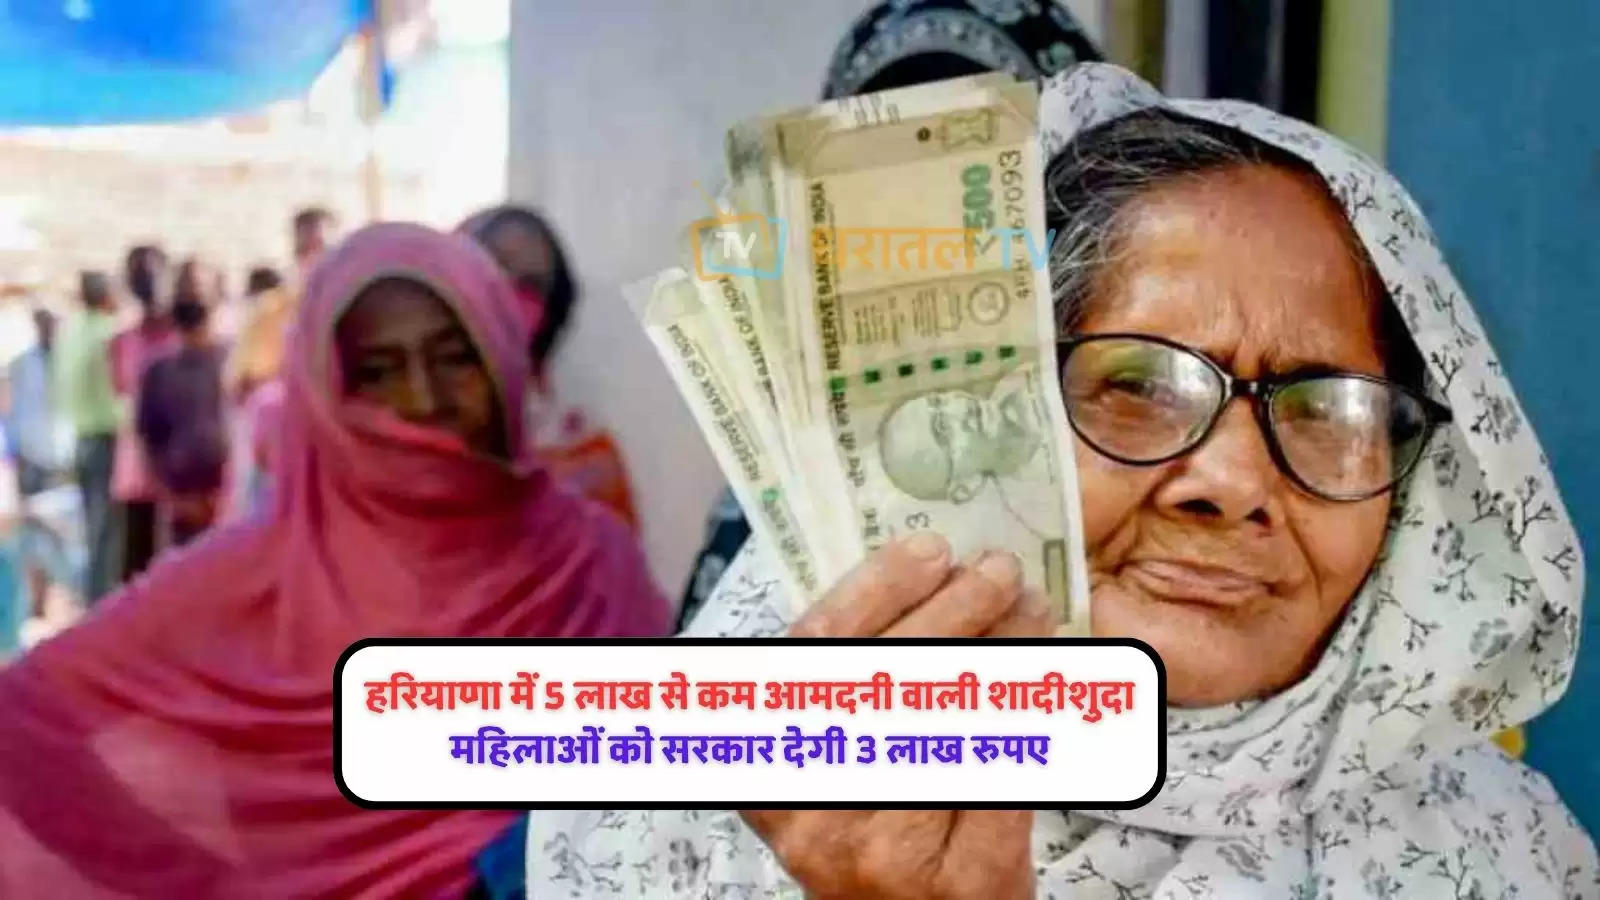 gift-to-women-with-less-than-five-lakh-income-in-haryana-three-lakh-rupees-will-be-given-under-this-scheme